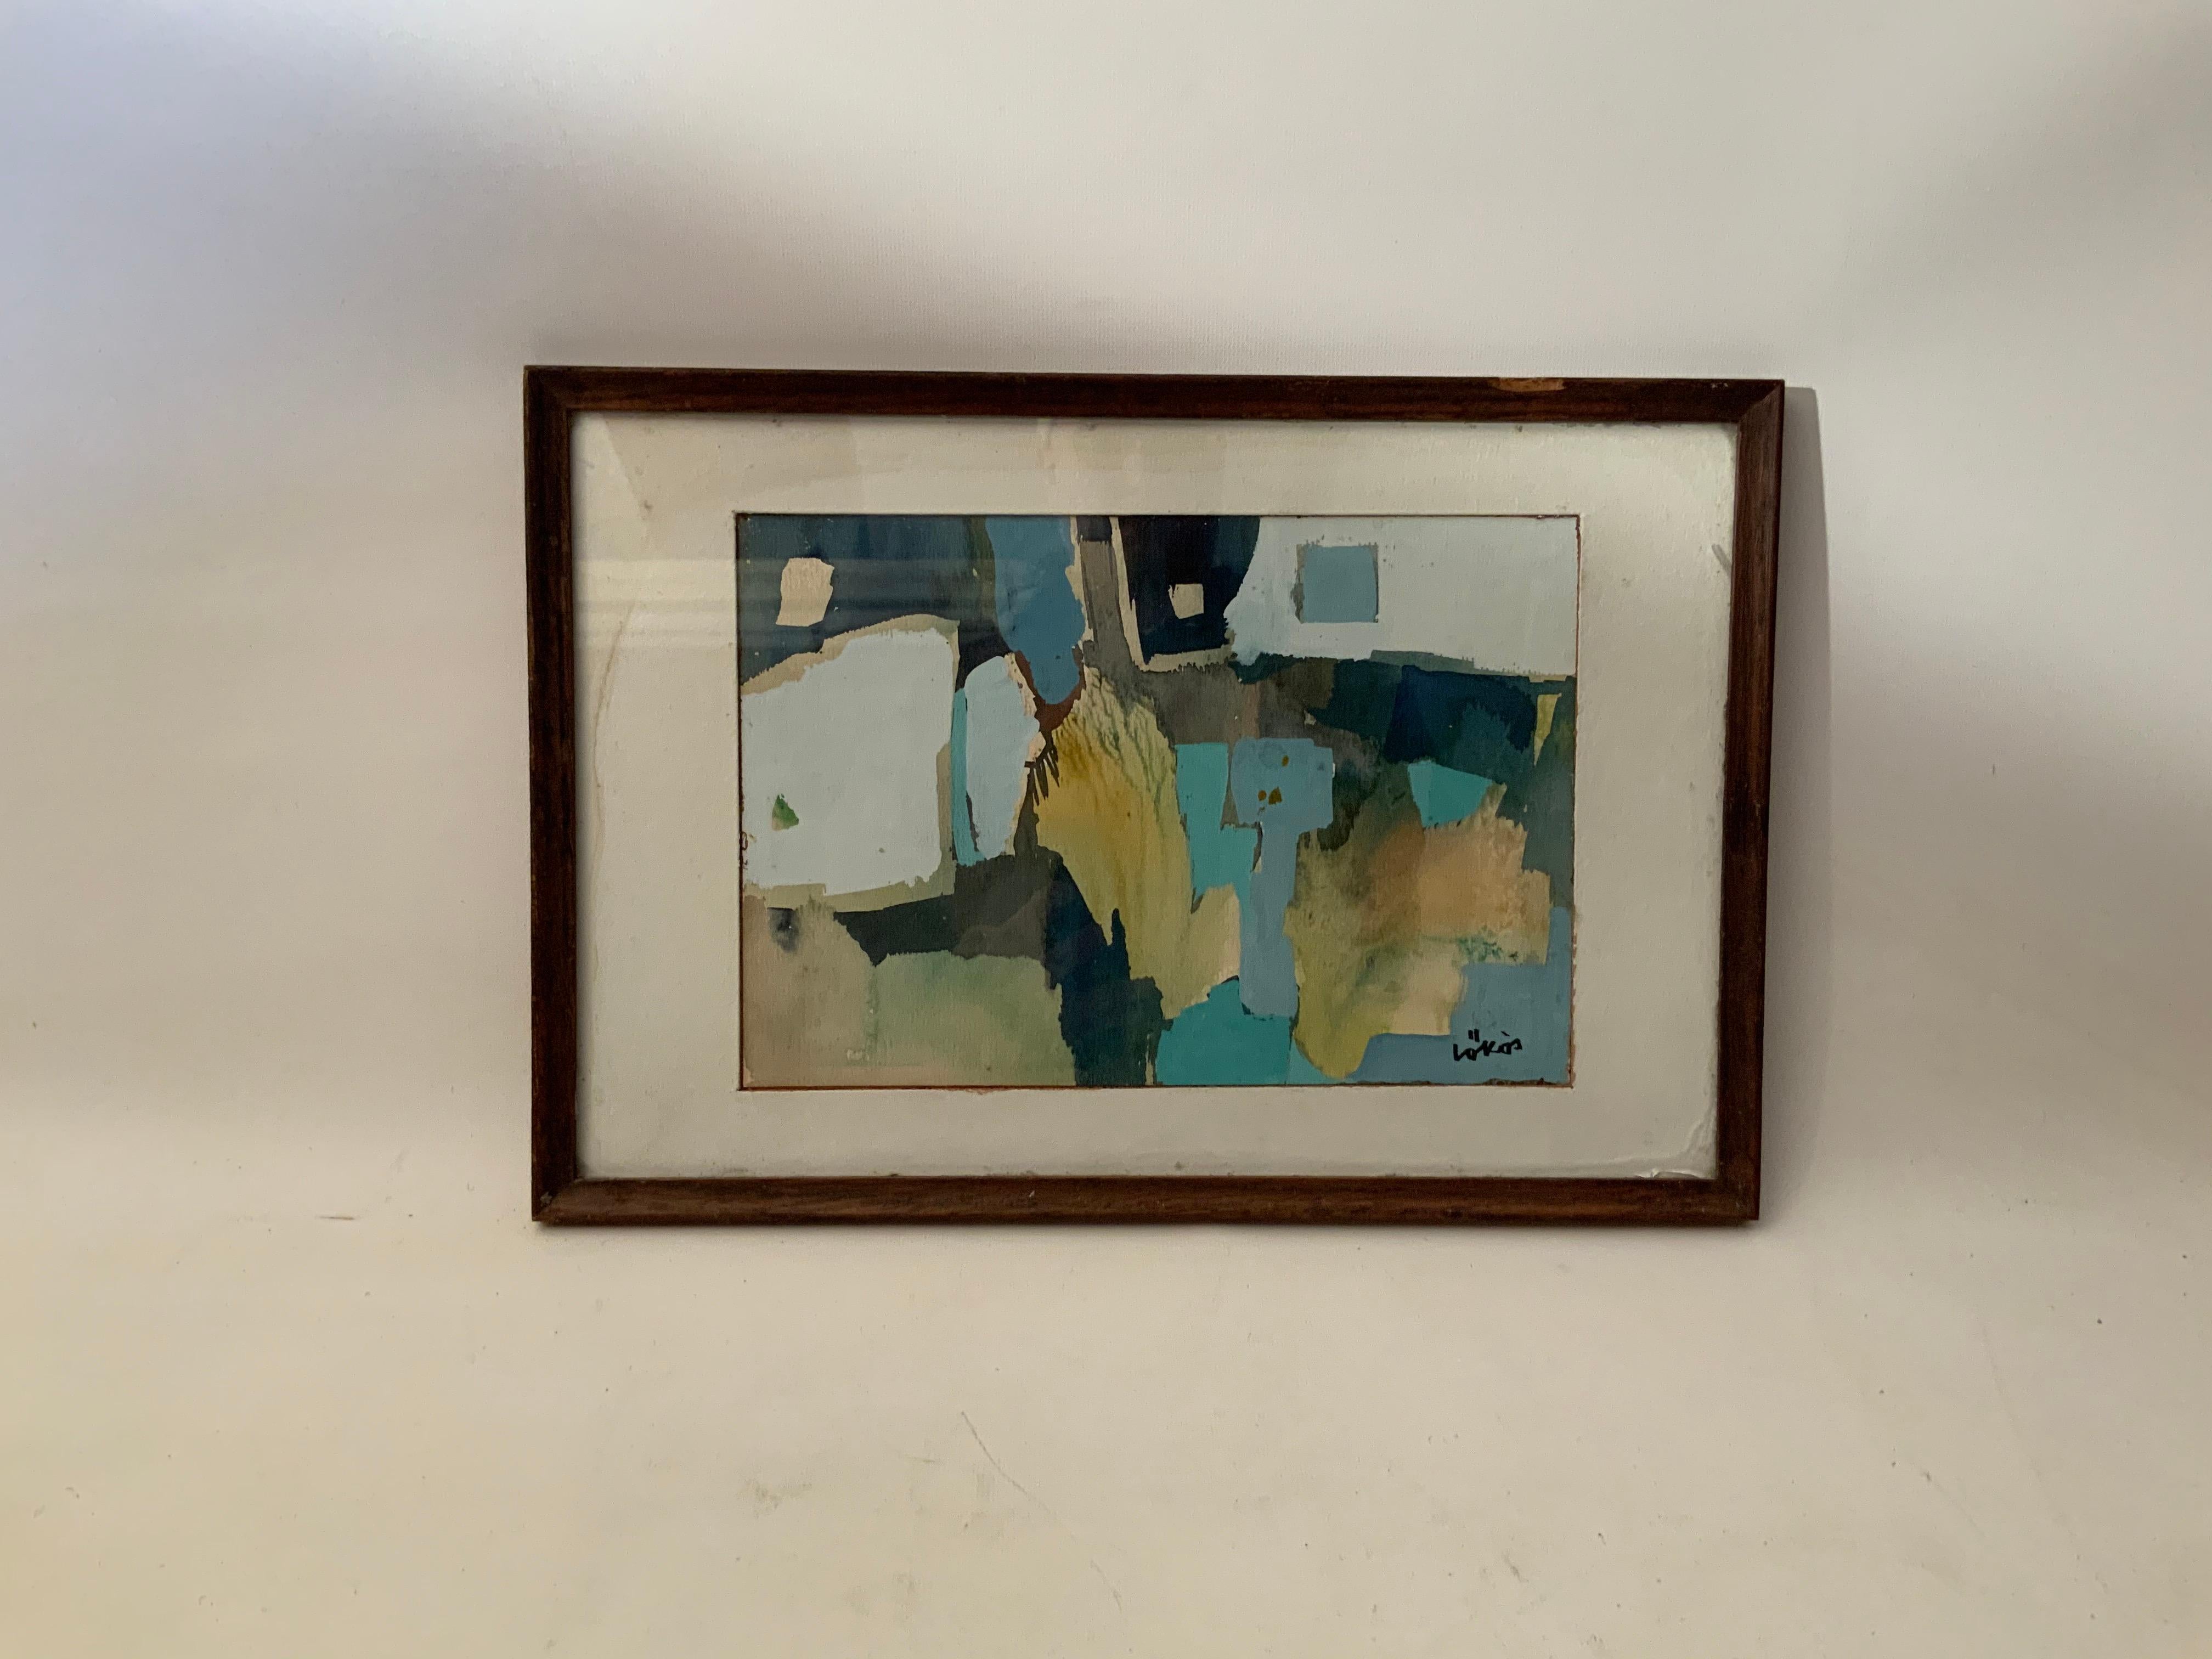 Watercolor on paper by Stefan Looks (1913-1994). Framed, glazed and matted. Signed, Lokos, lower right, circa 1950-1960. Lokos, originally from Hungary, was a prominent member of the Woodstock Art Association and the Silvermine Artists Guild. The